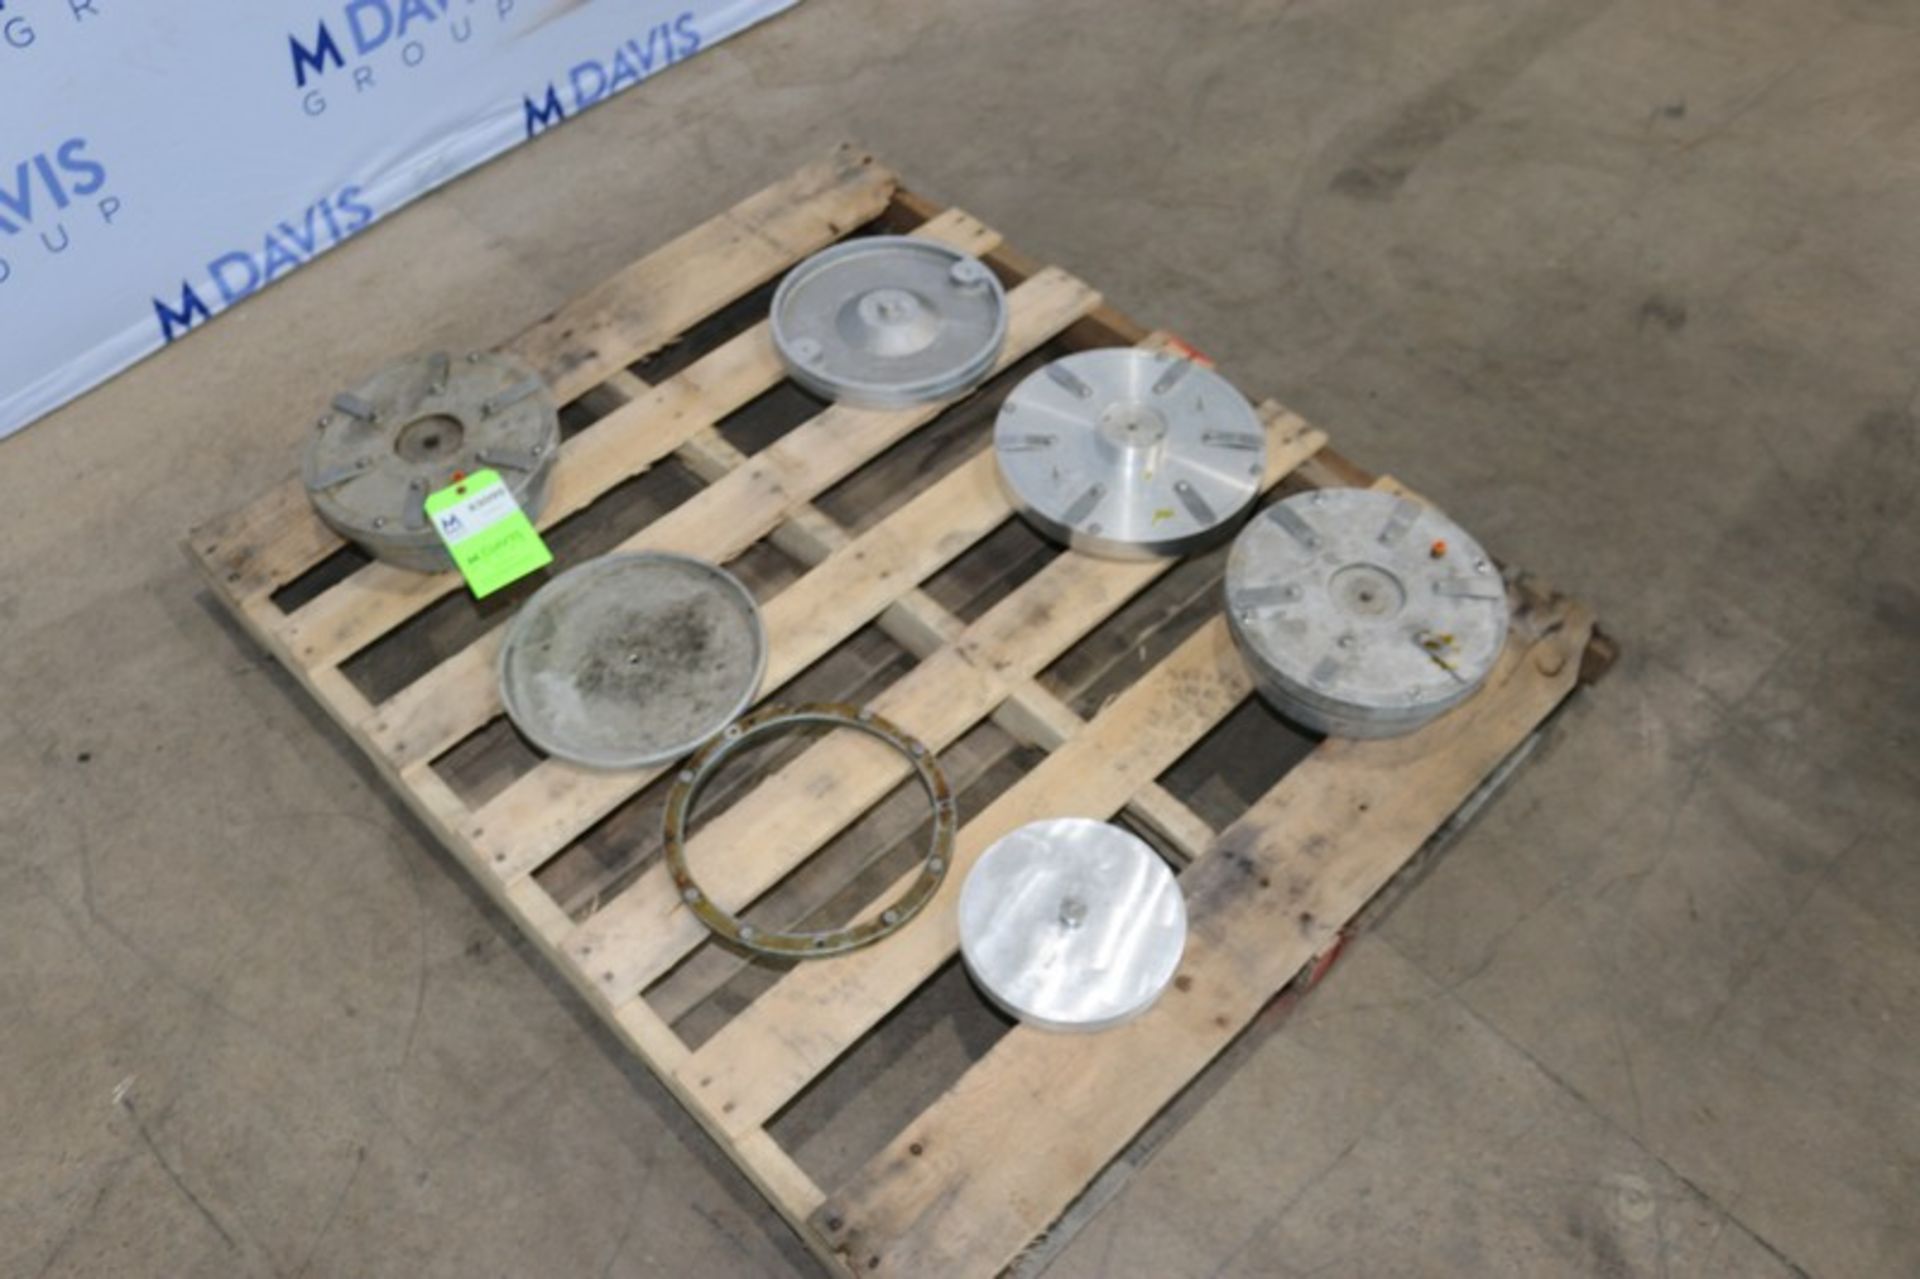 Pallet of Assorted Pie & Tart Press Molds, Assorted Sized (INV#83099)(Located @ the MDG Auction